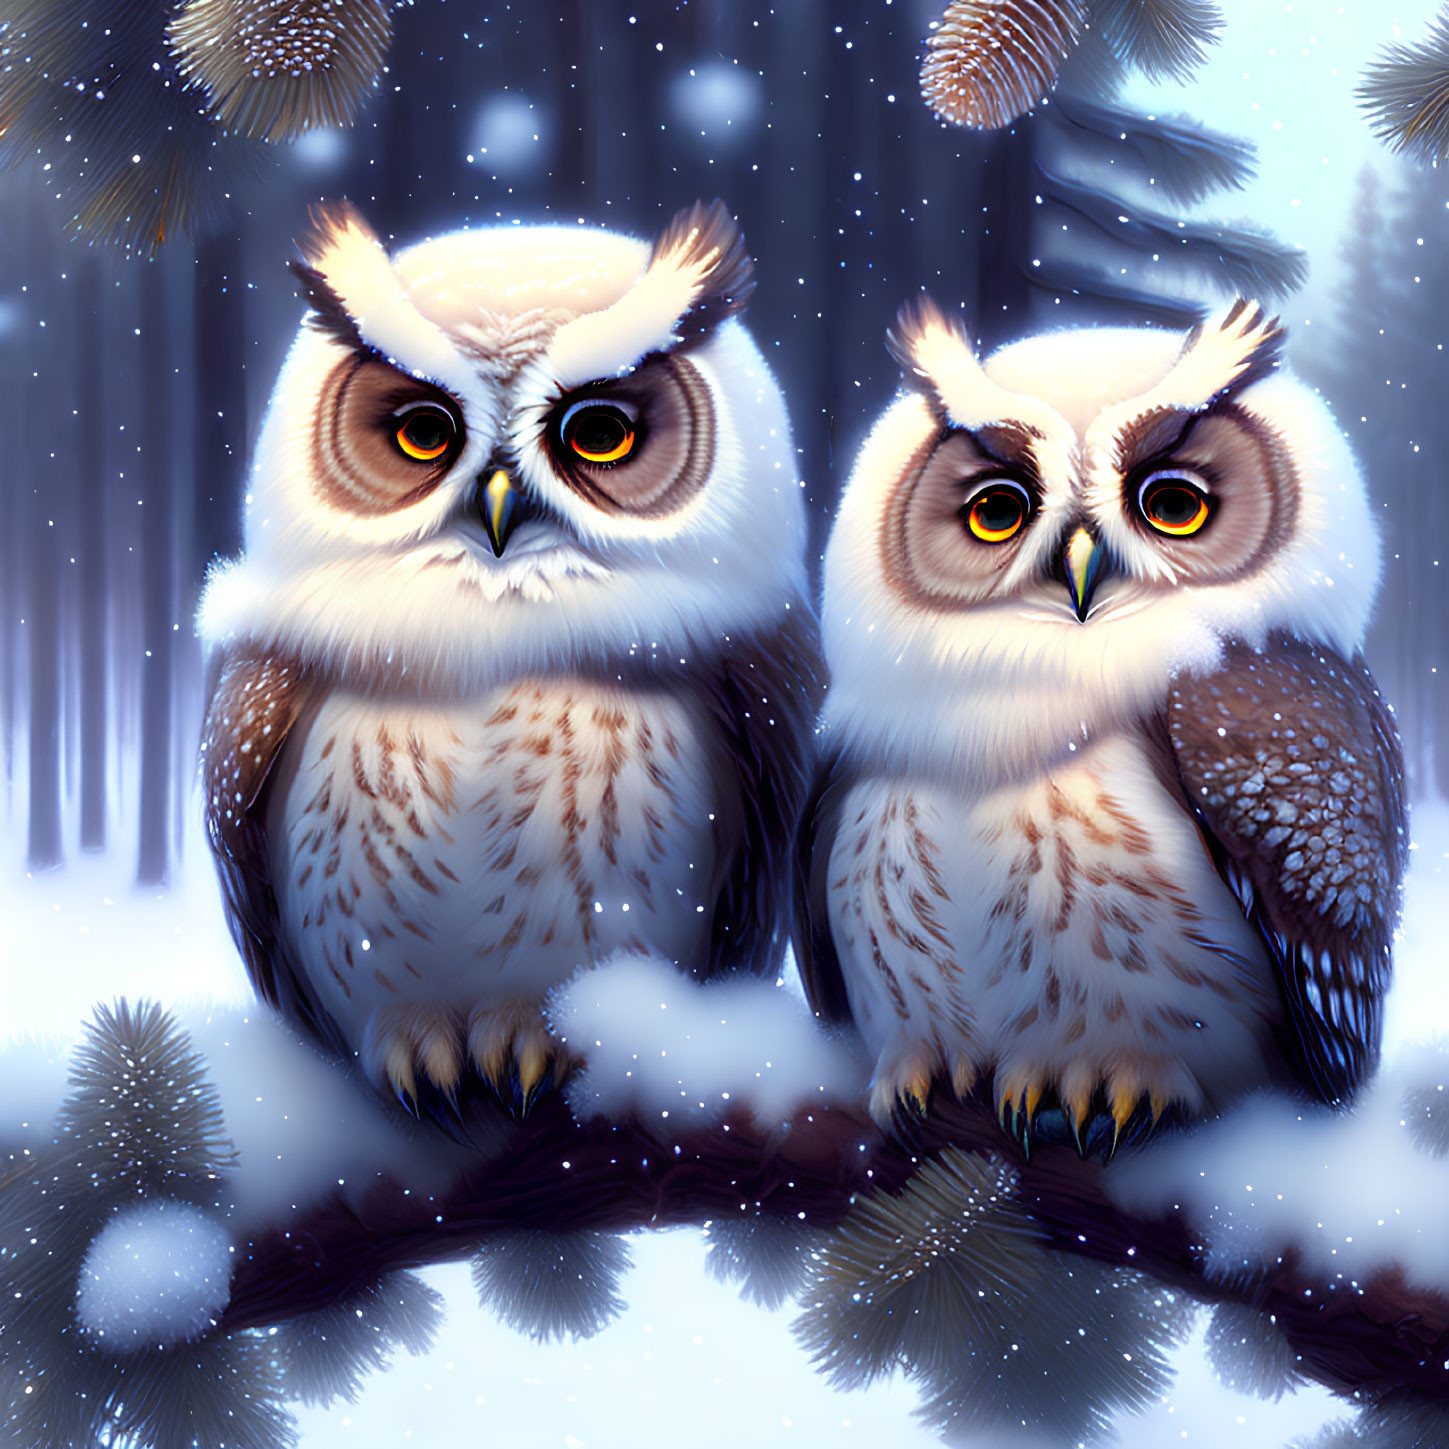 Illustrated snowy forest scene with two owls on branch